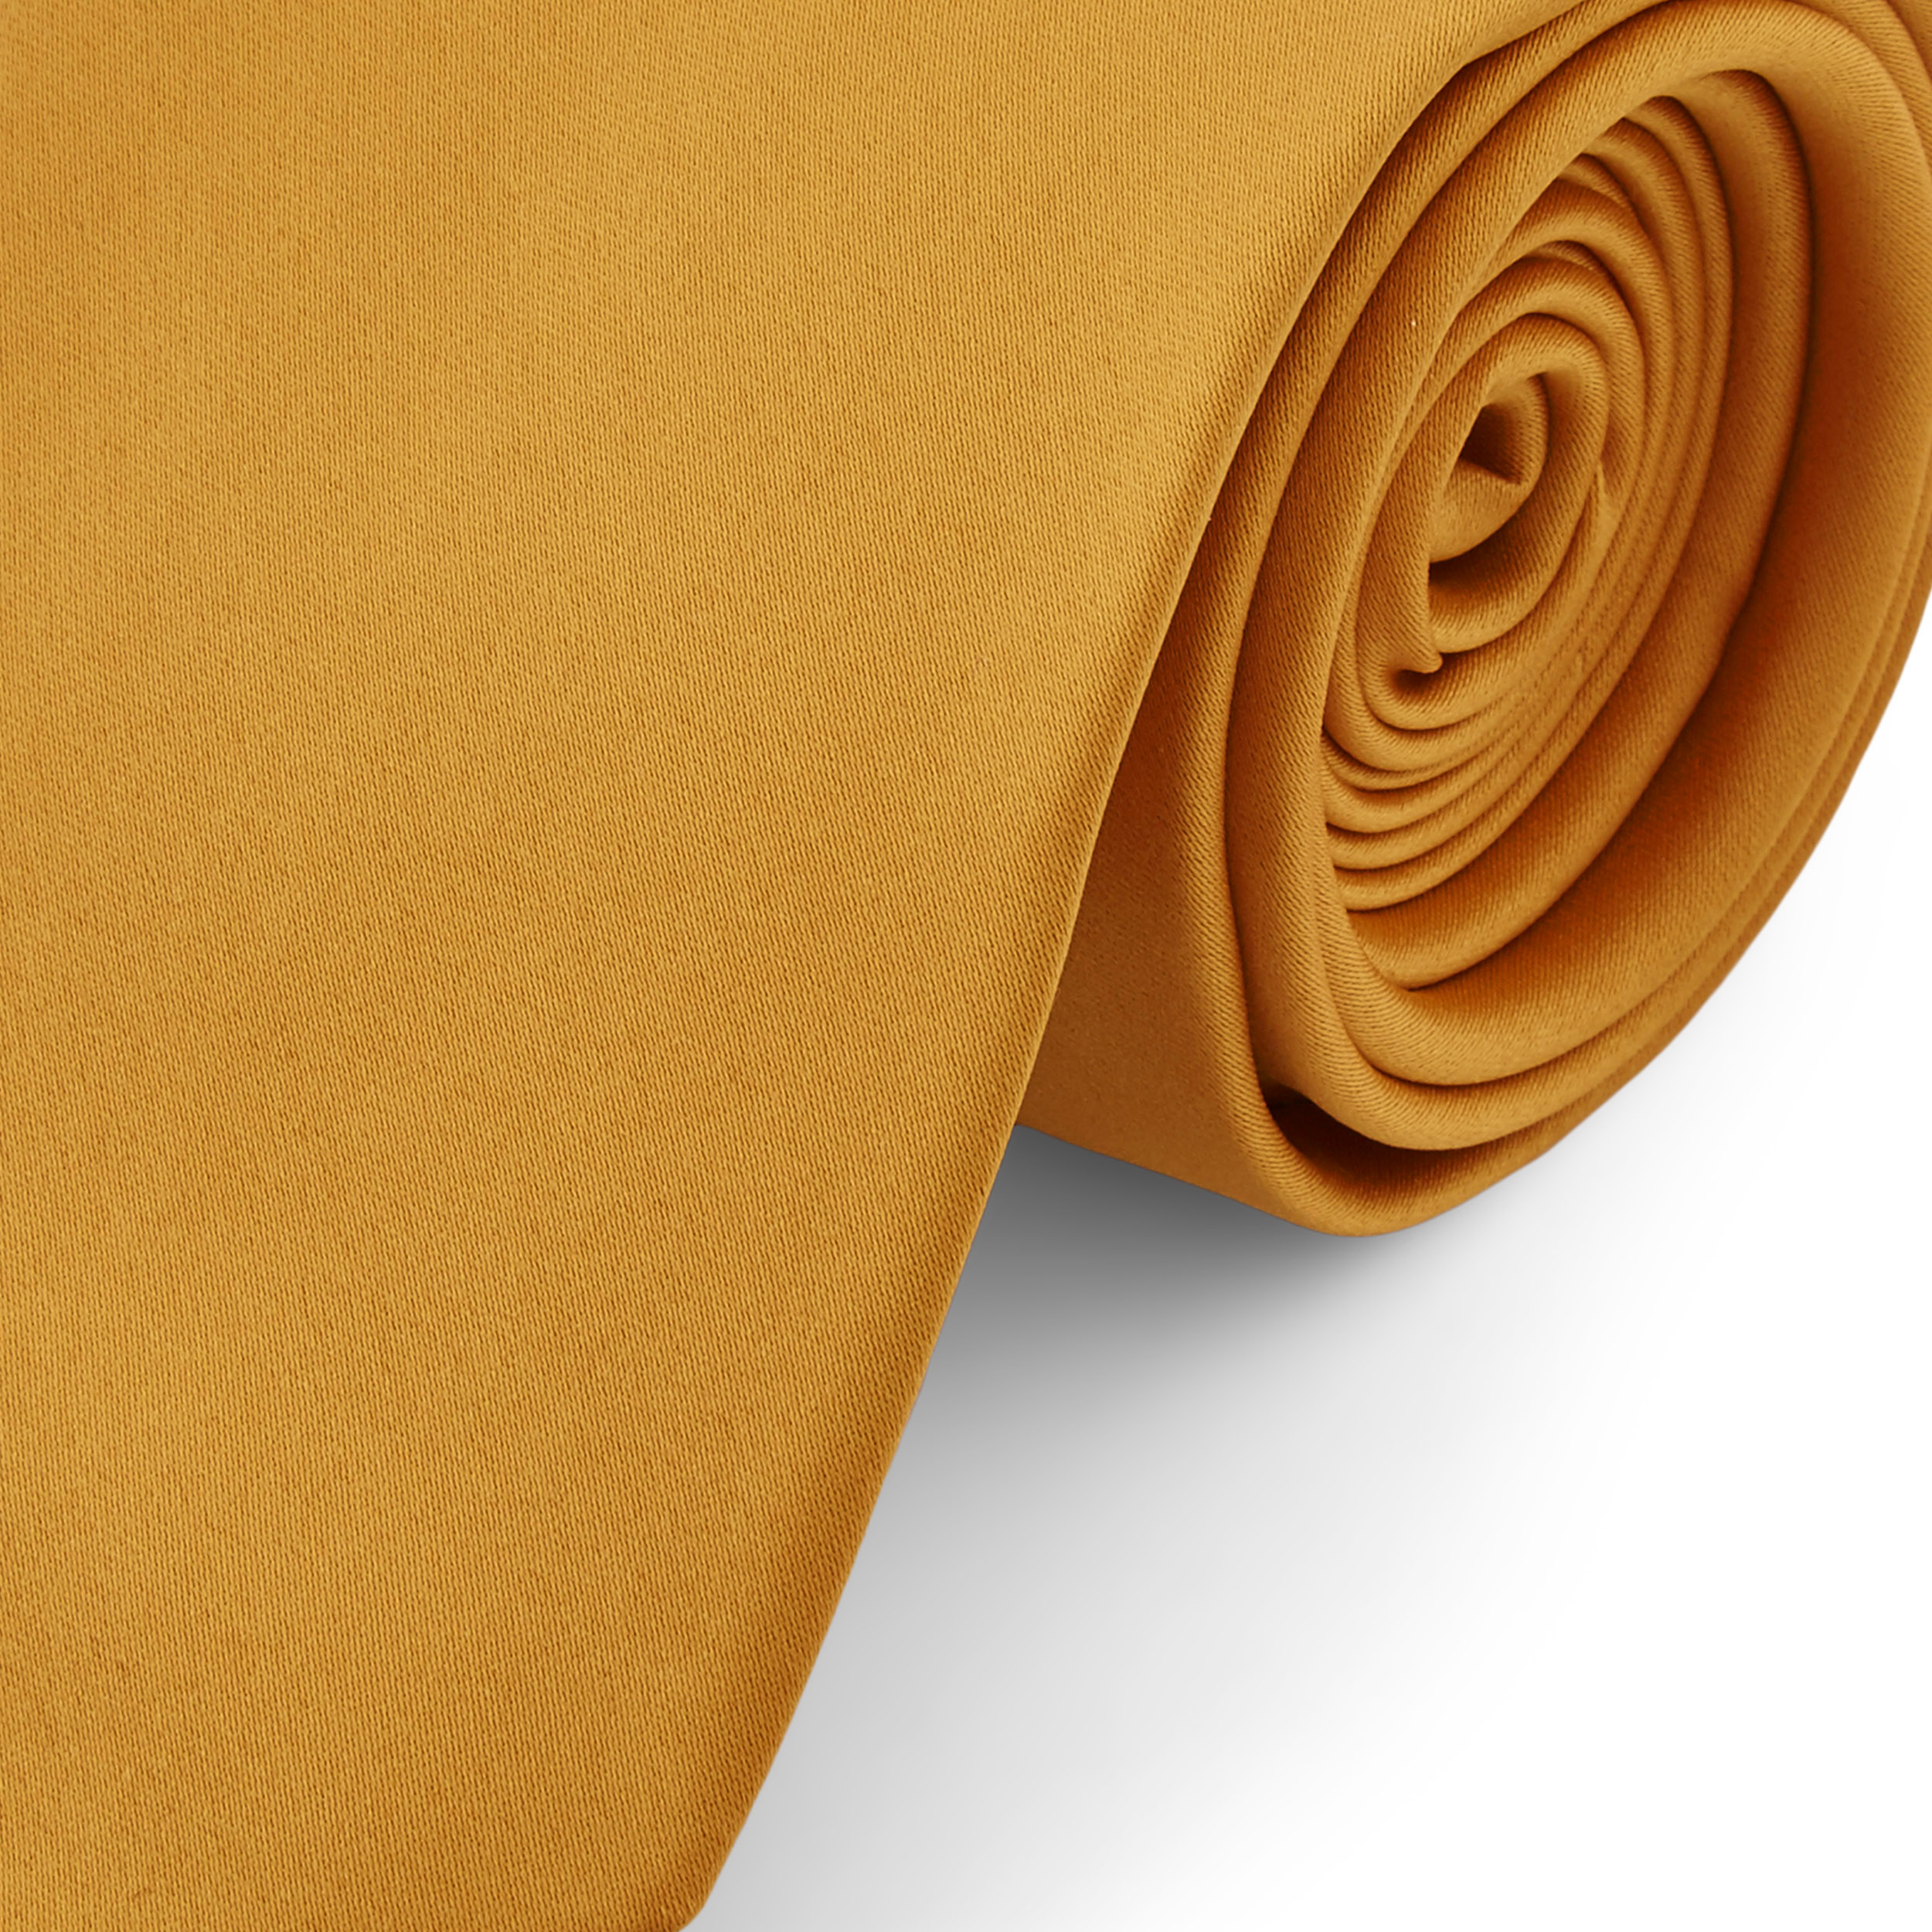 Basic Mustard Yellow Polyester Tie, In stock!